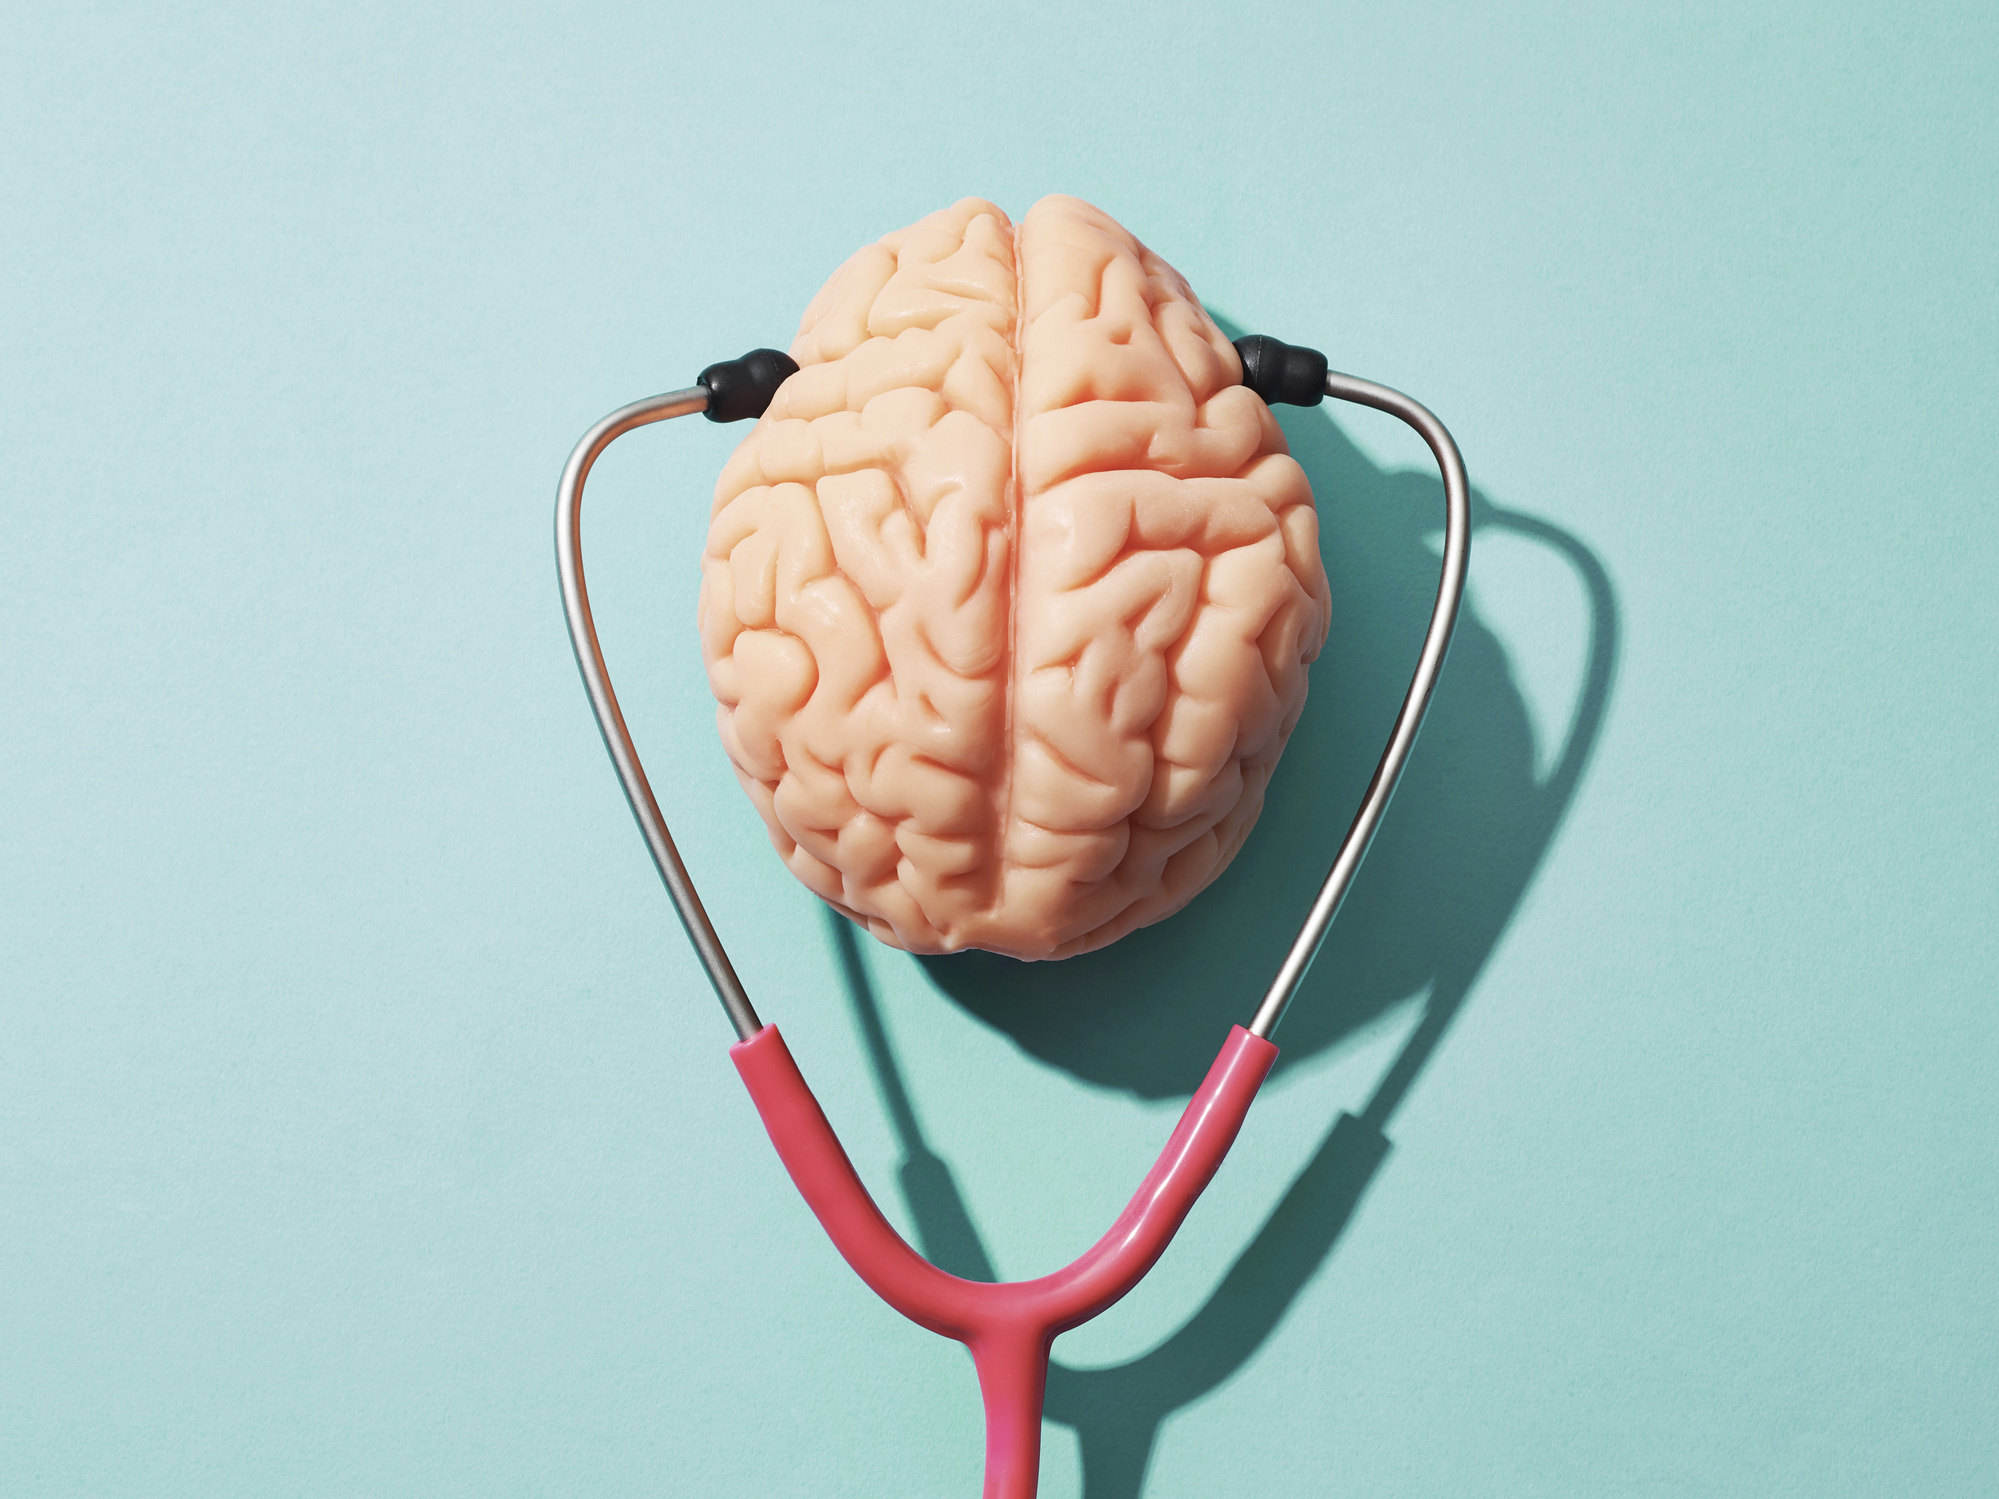 A stethoscope is wrapped around a model of a human brain on a plain background